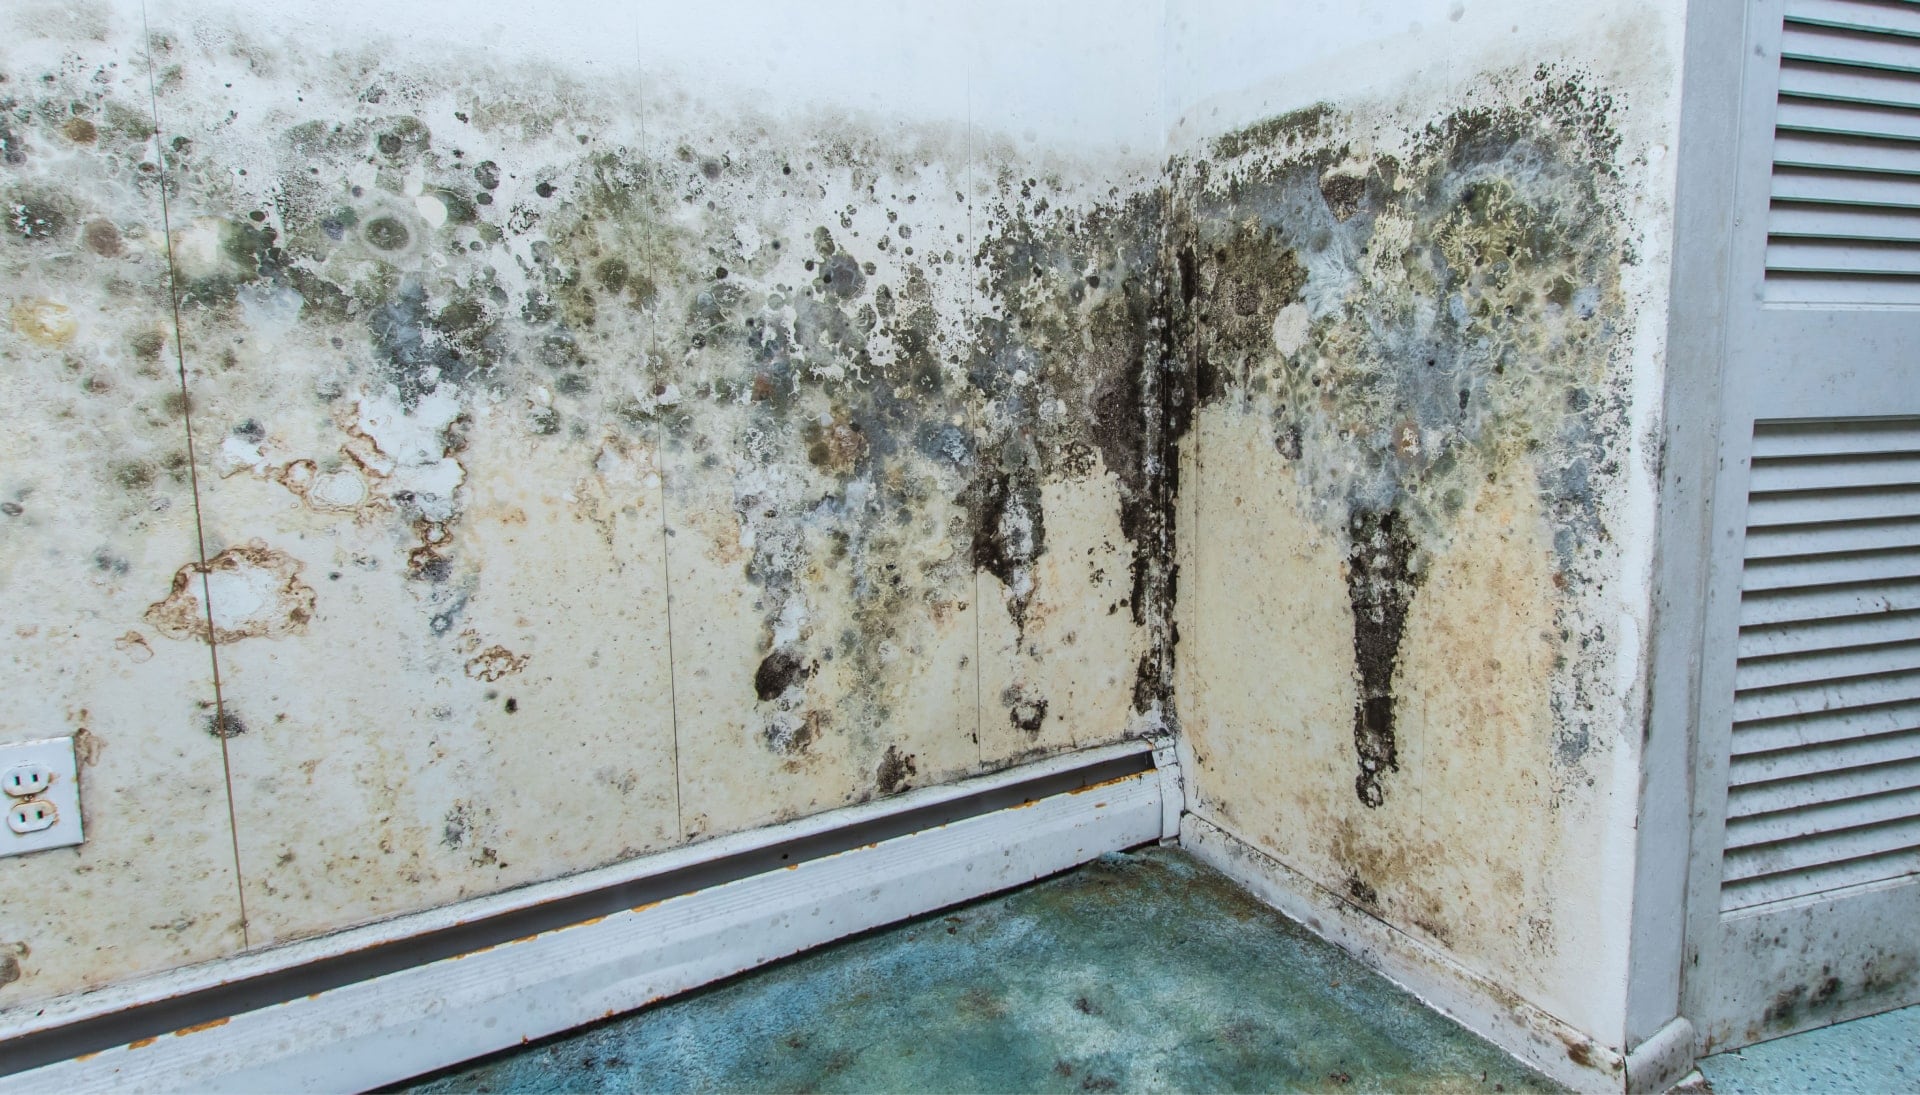 A mold remediation team using specialized techniques to remove mold damage and control odors in a Lauderhill property, with a focus on safety and efficiency